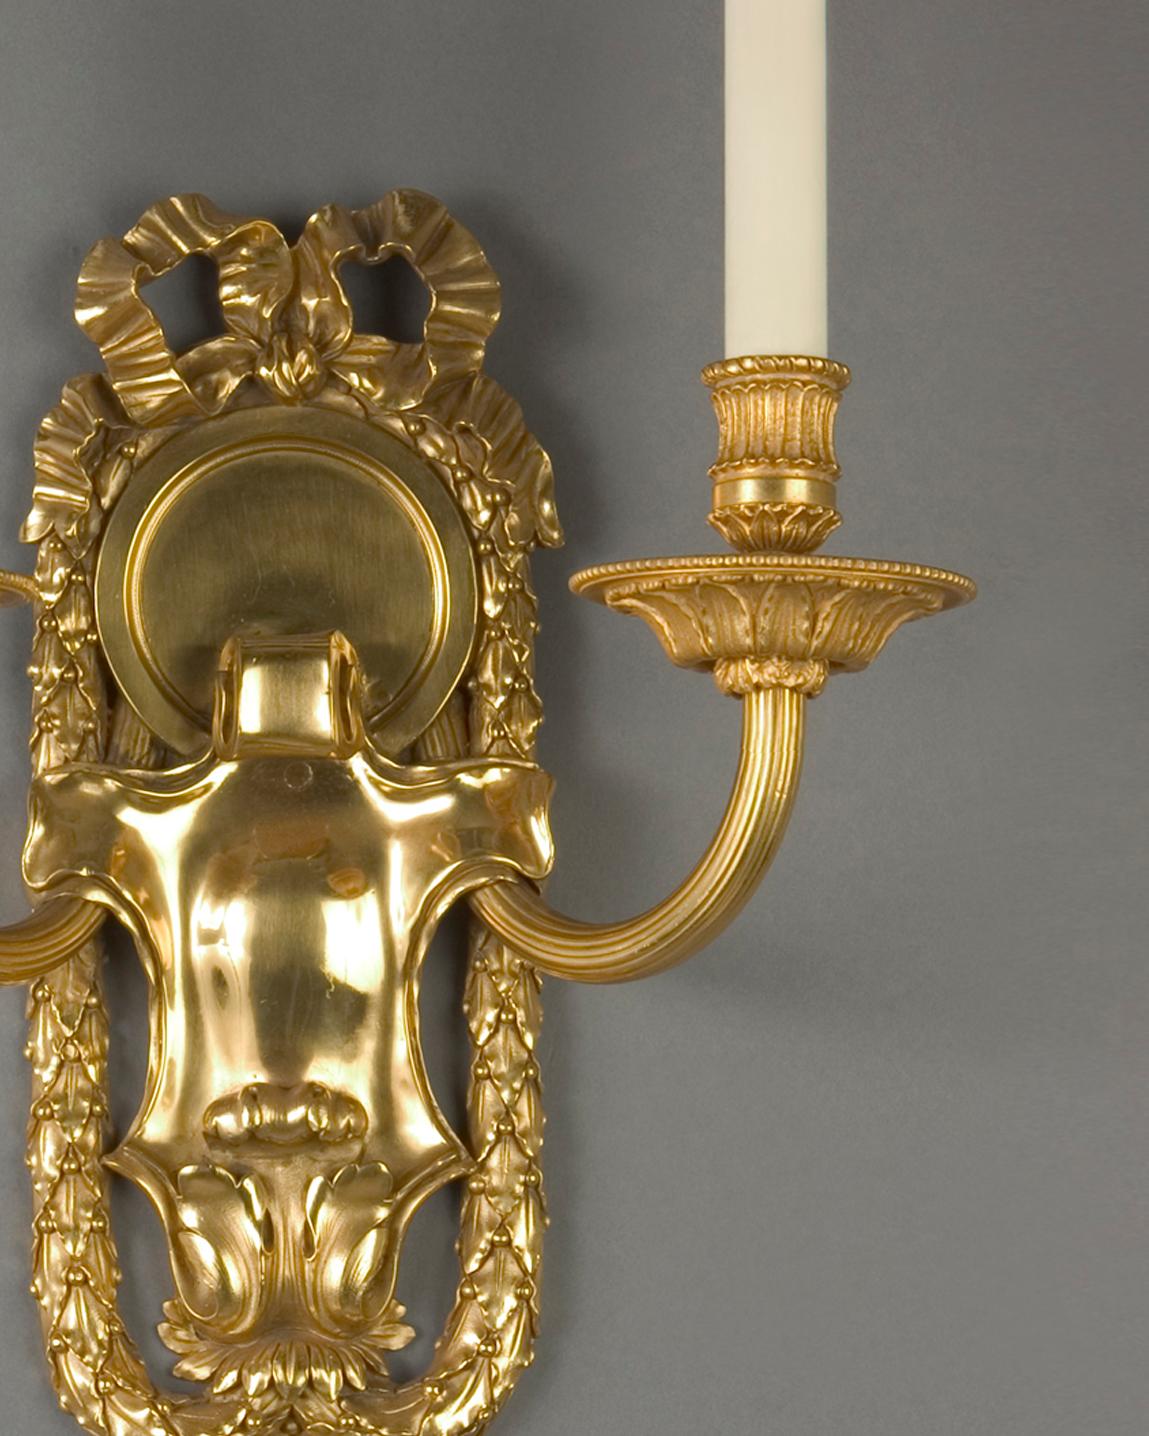 Baroque Pair of Two Arm Gilded Bronze and Copper Sconces by the E. F. Caldwell Co. 1910s For Sale